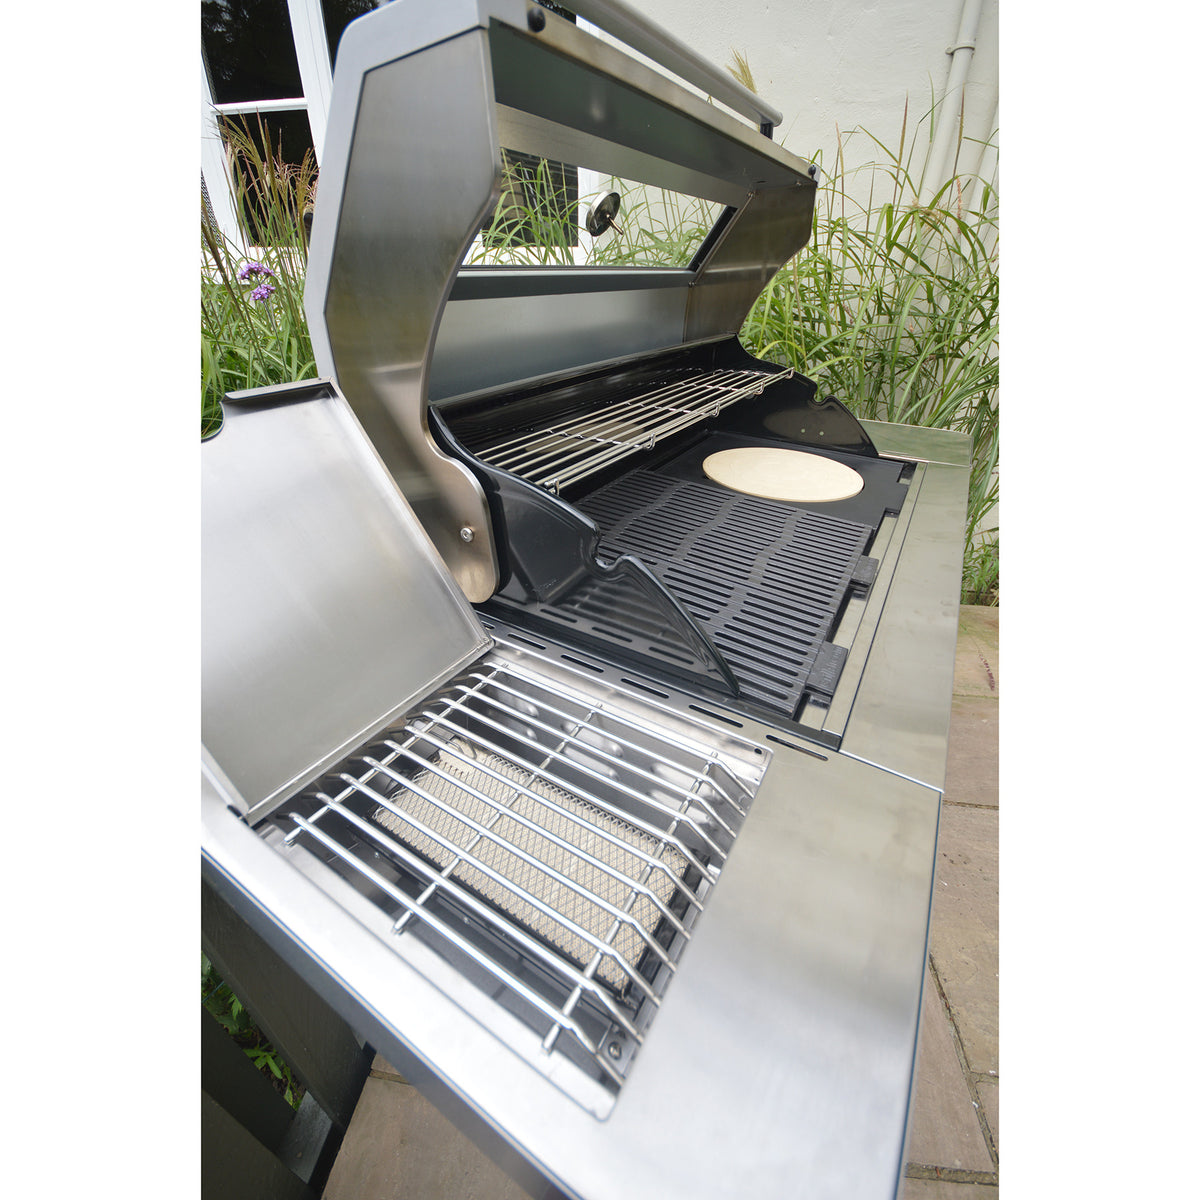 Grillstream Gourmet 6 Burner Hybrid Gas and Charcoal Barbecue - Stainless Steel